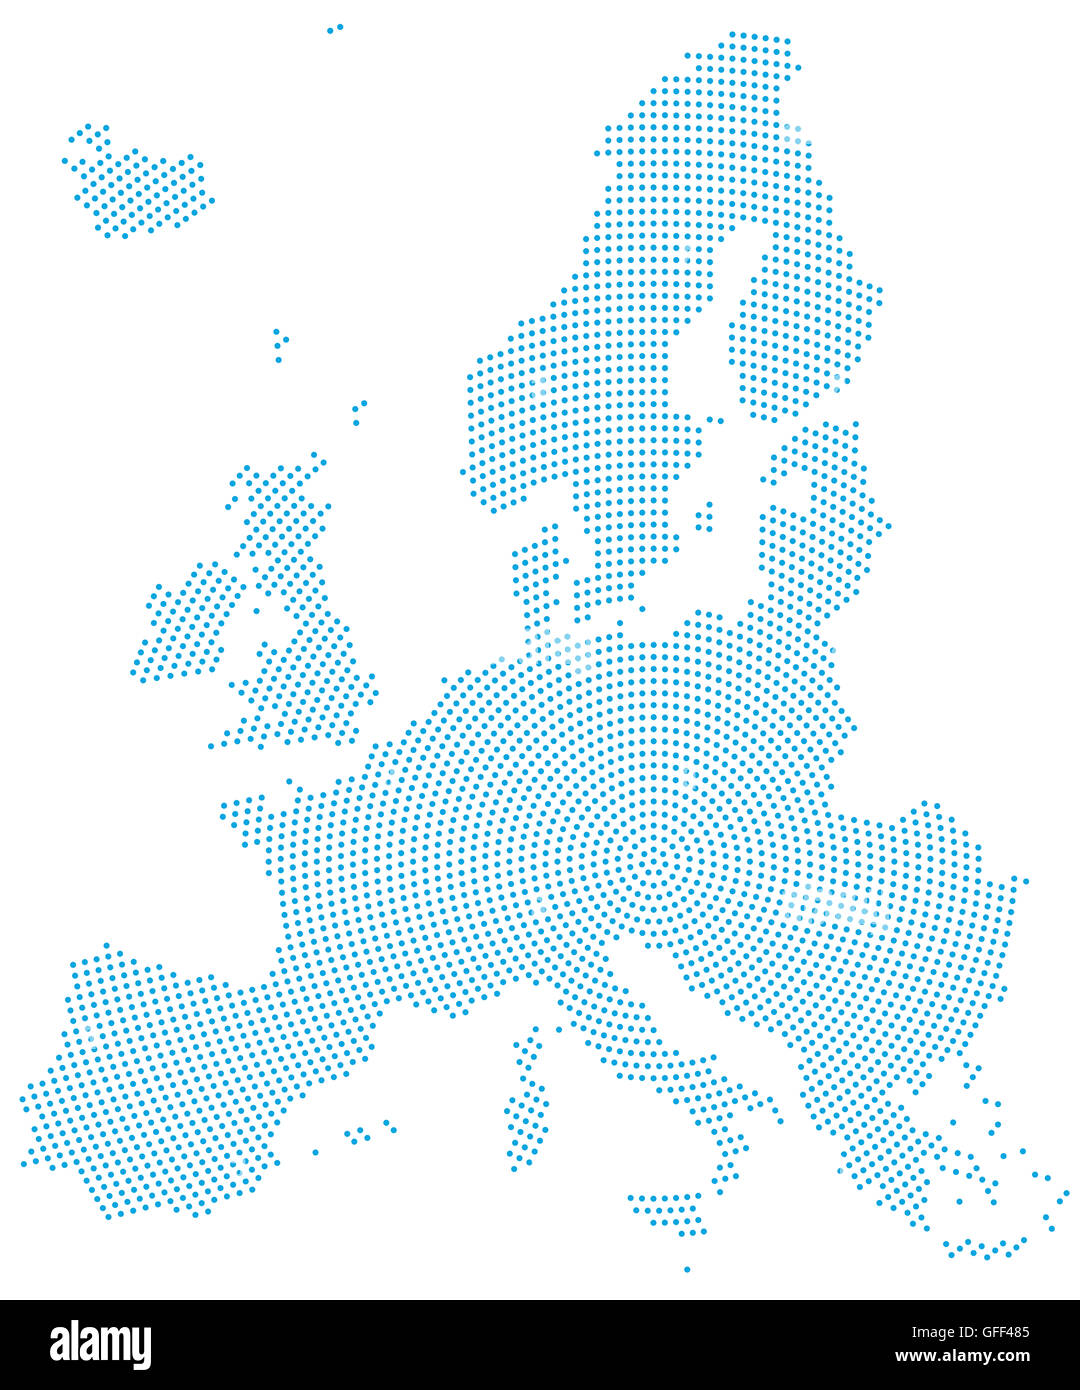 Europe map radial dot pattern. Blue dots going from the center outwards and form the silhouette of the European Union area. Stock Photo